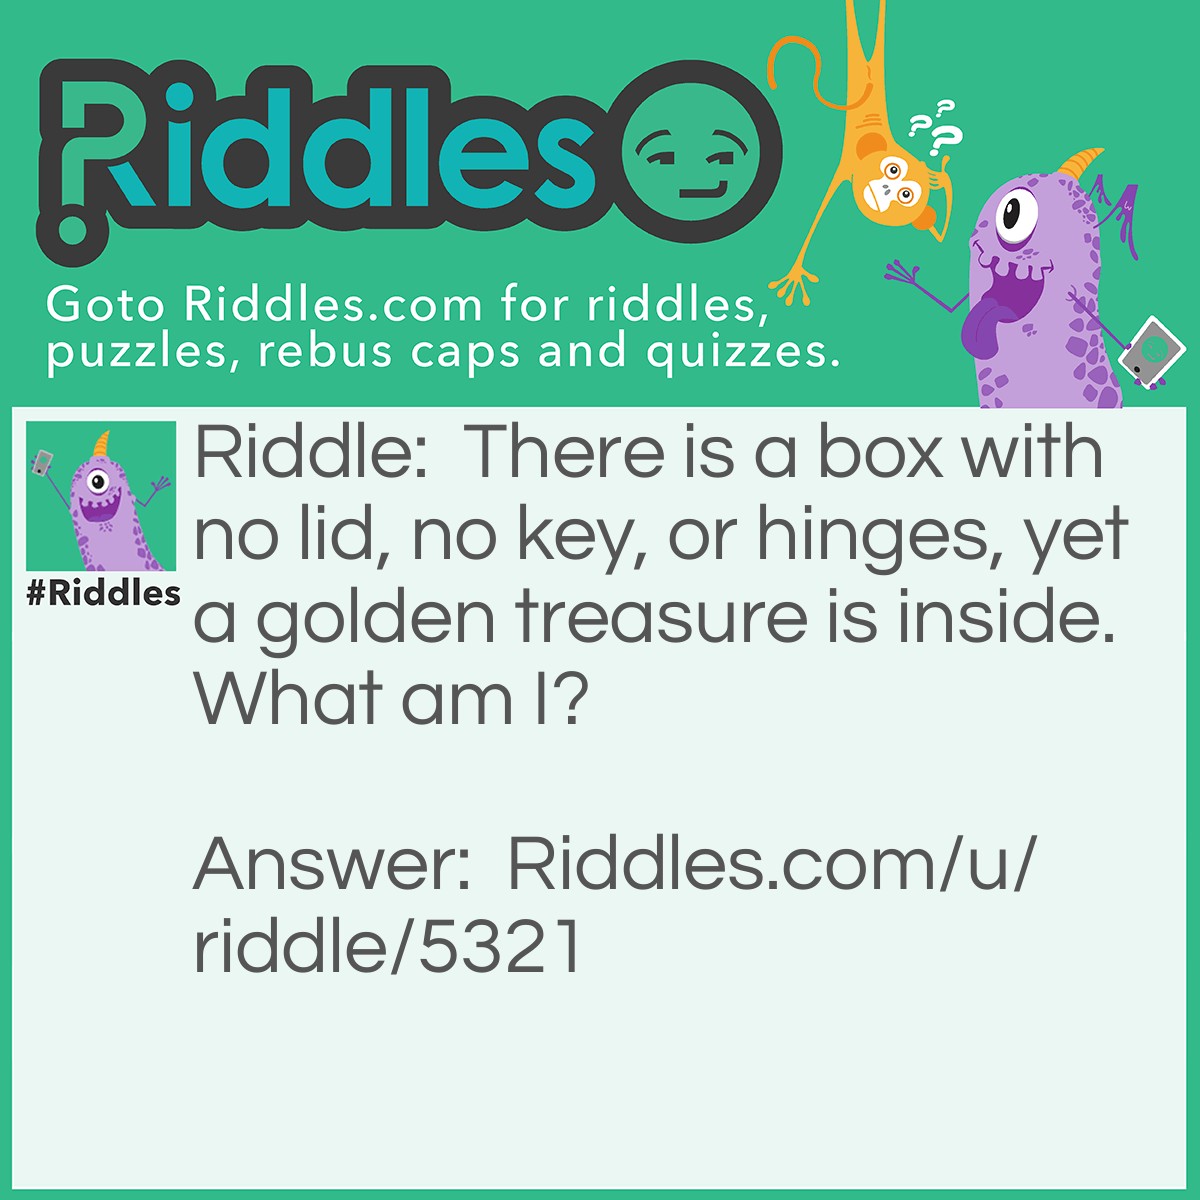 Riddle: There is a box with no lid, no key, or hinges, yet a golden treasure is inside. What am I? Answer: An egg!